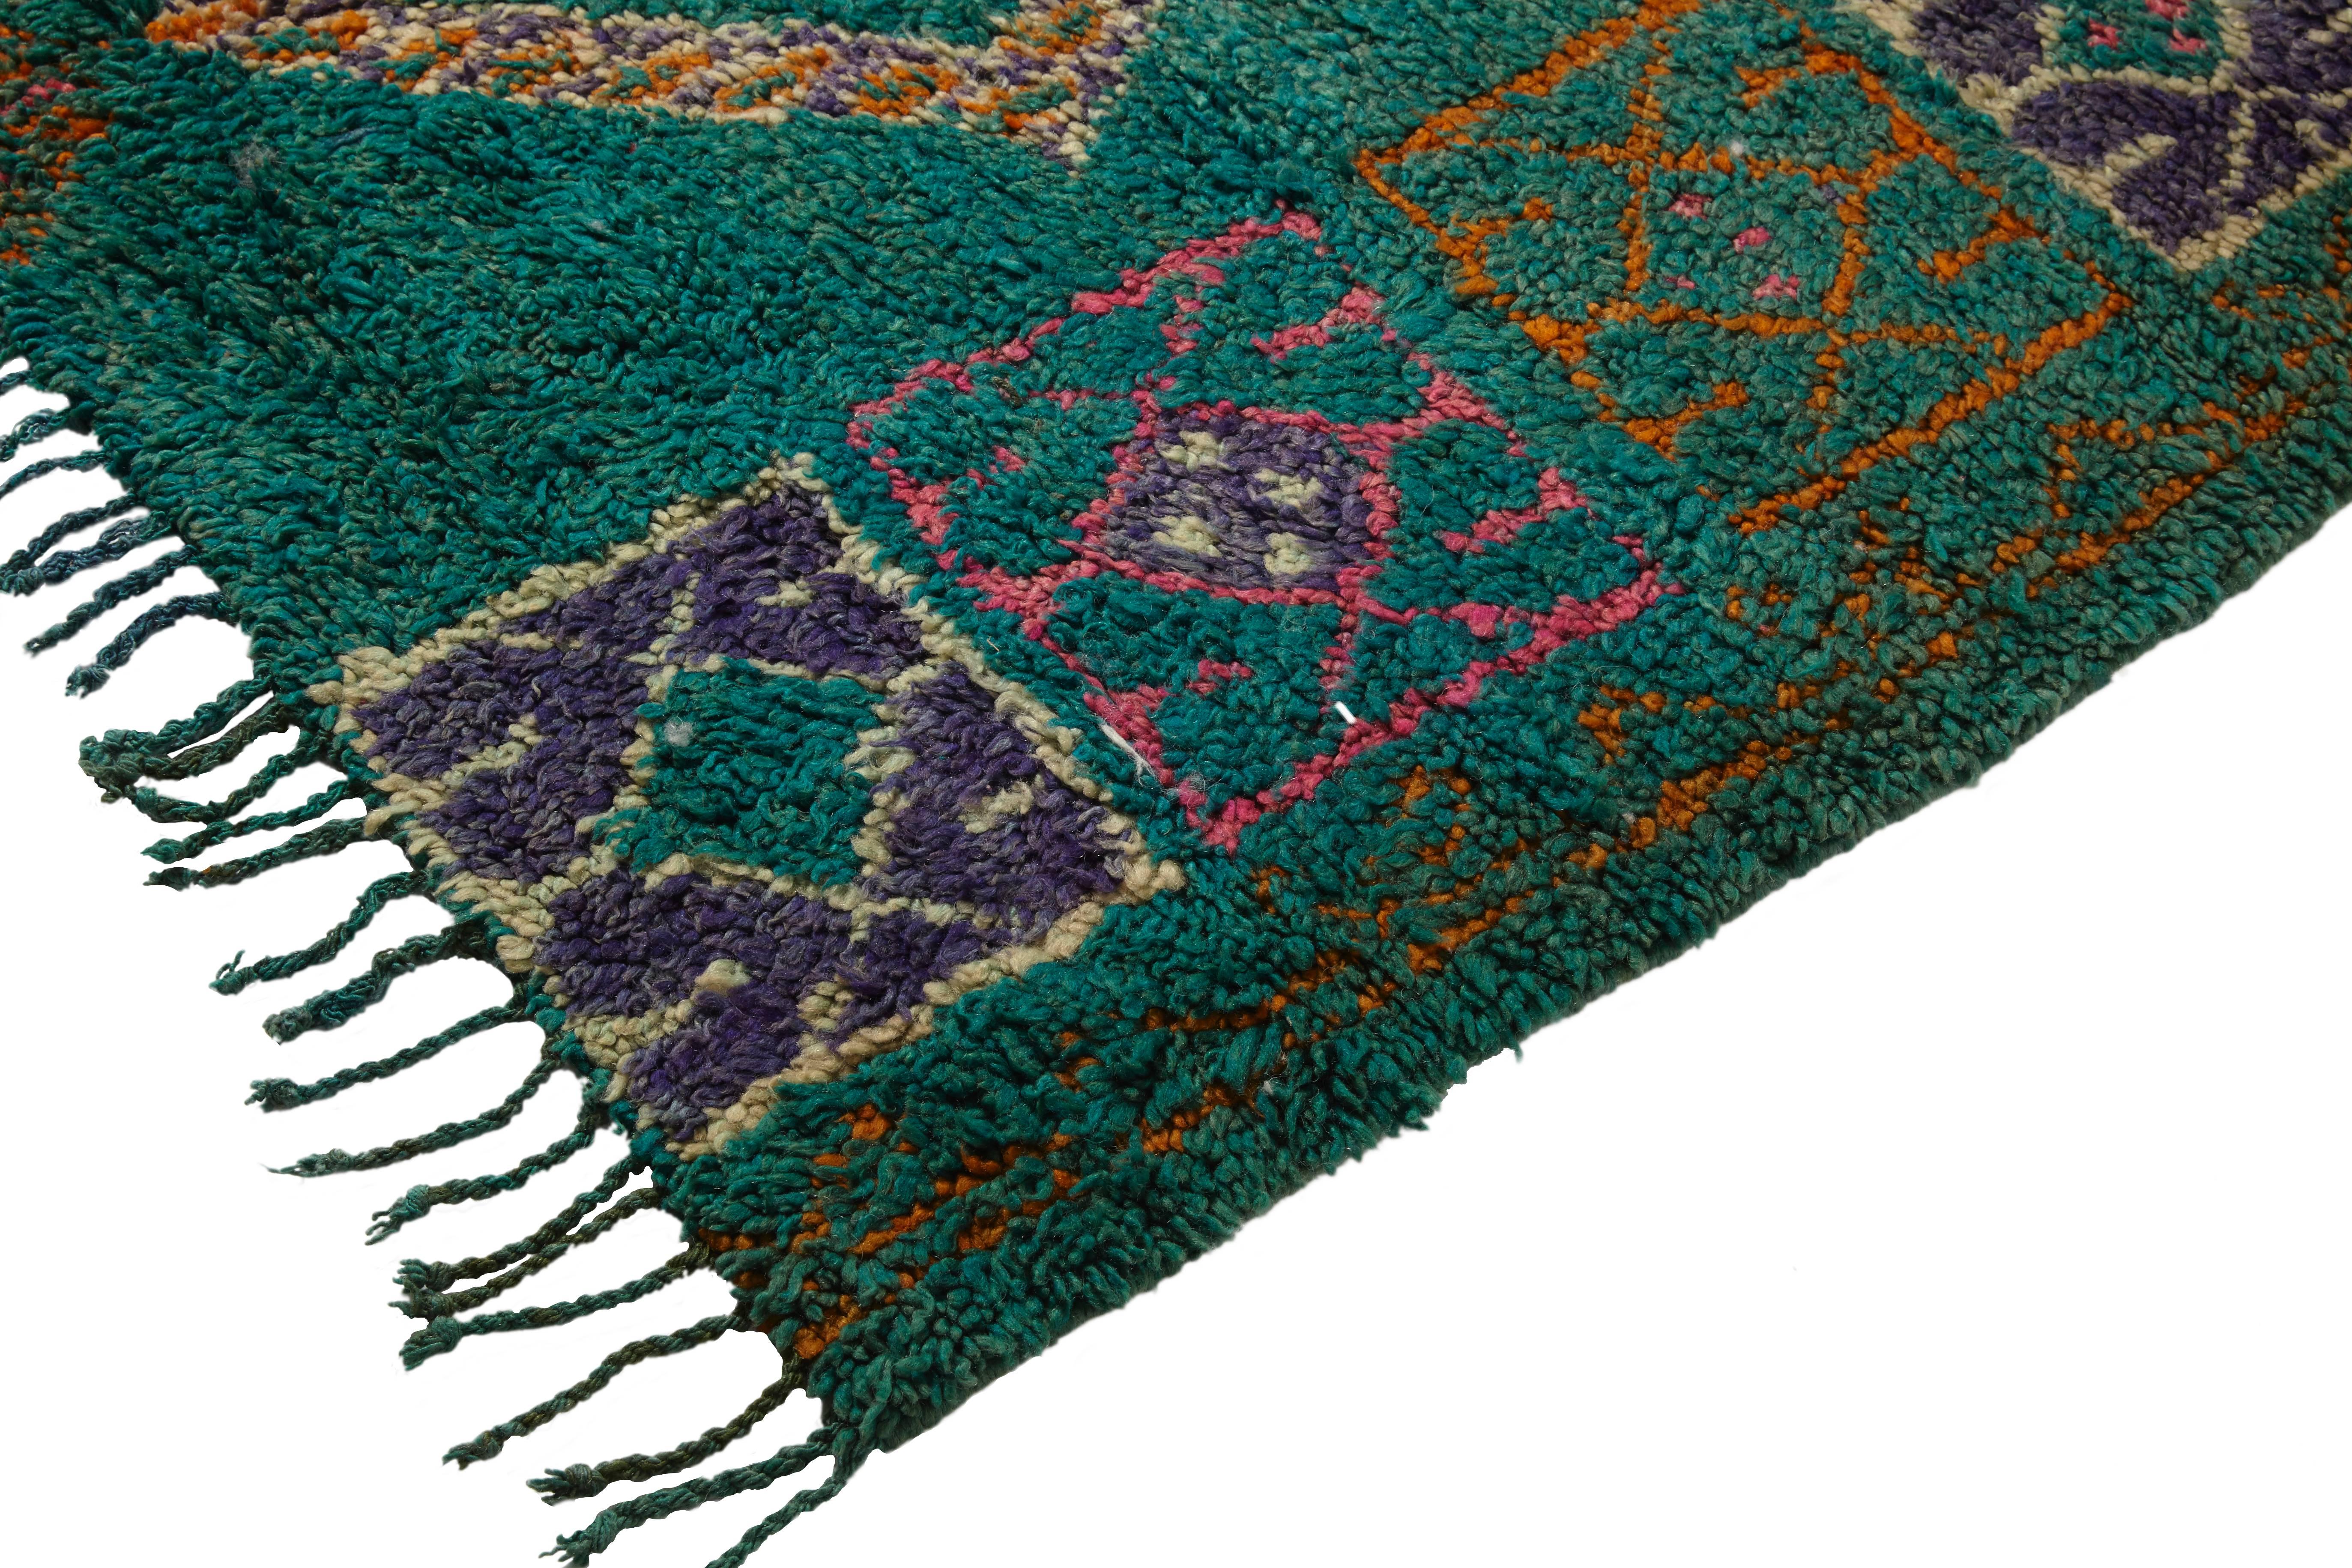 Boujad rug,
Middle Atlas Mountains,
Morocco,
Late 20th century.
Wool, Pile rug
Emerald green, rare colours.

Measures: 327 x 151 cm.

Late 20th century Boujad rug handwoven with a thick pile of wool in mainly green colouring with small